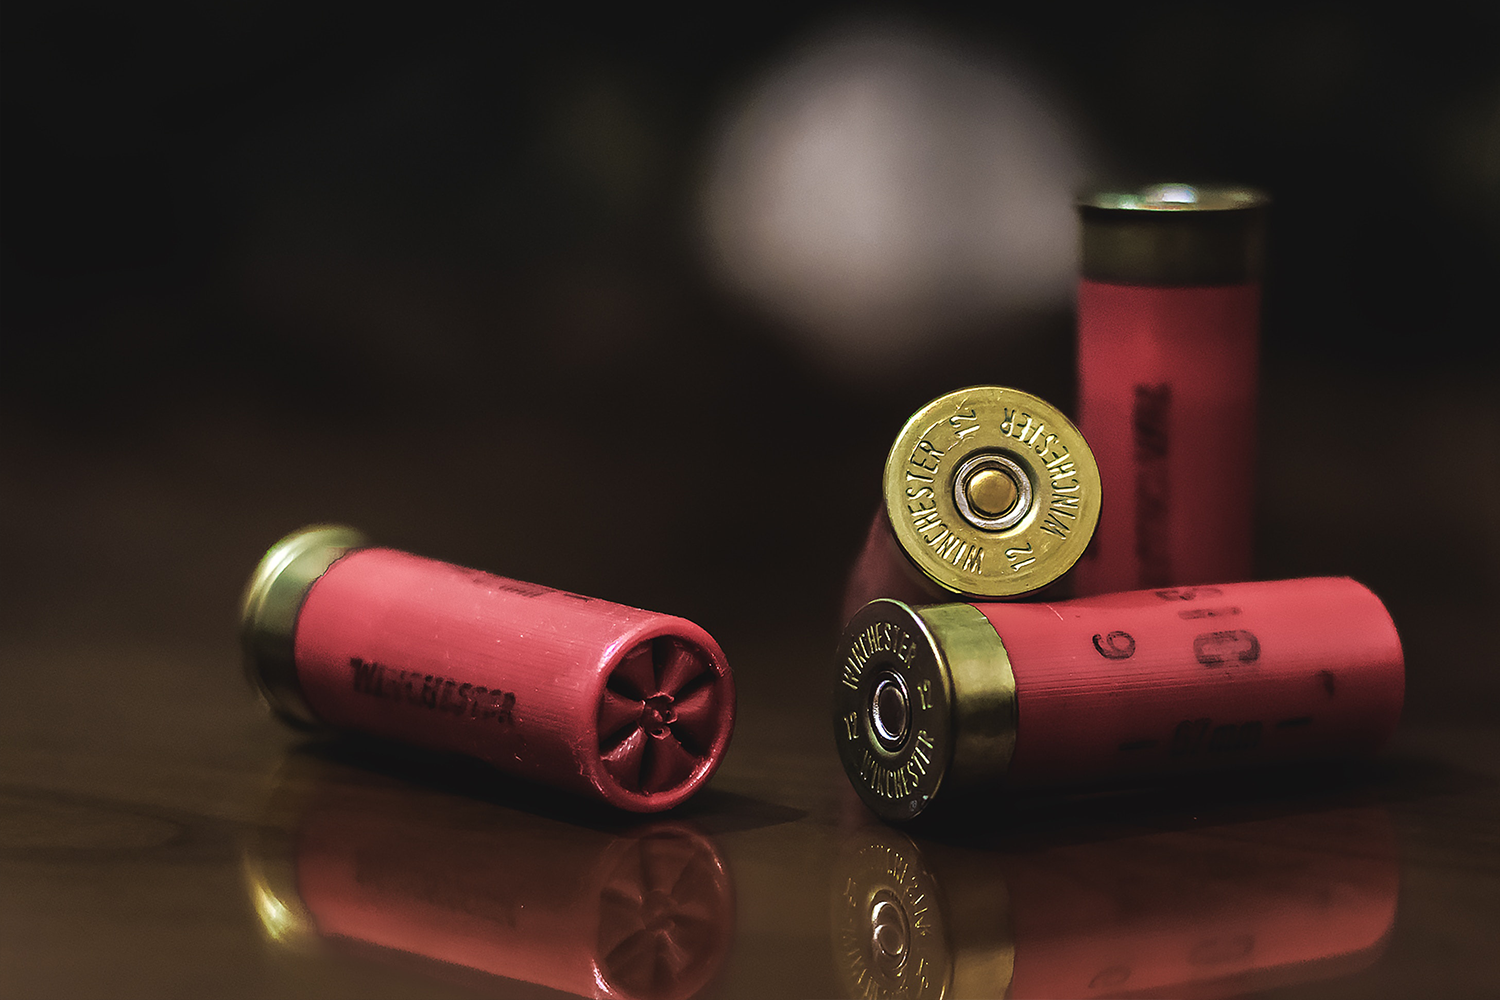 Photo of bullet casings on table